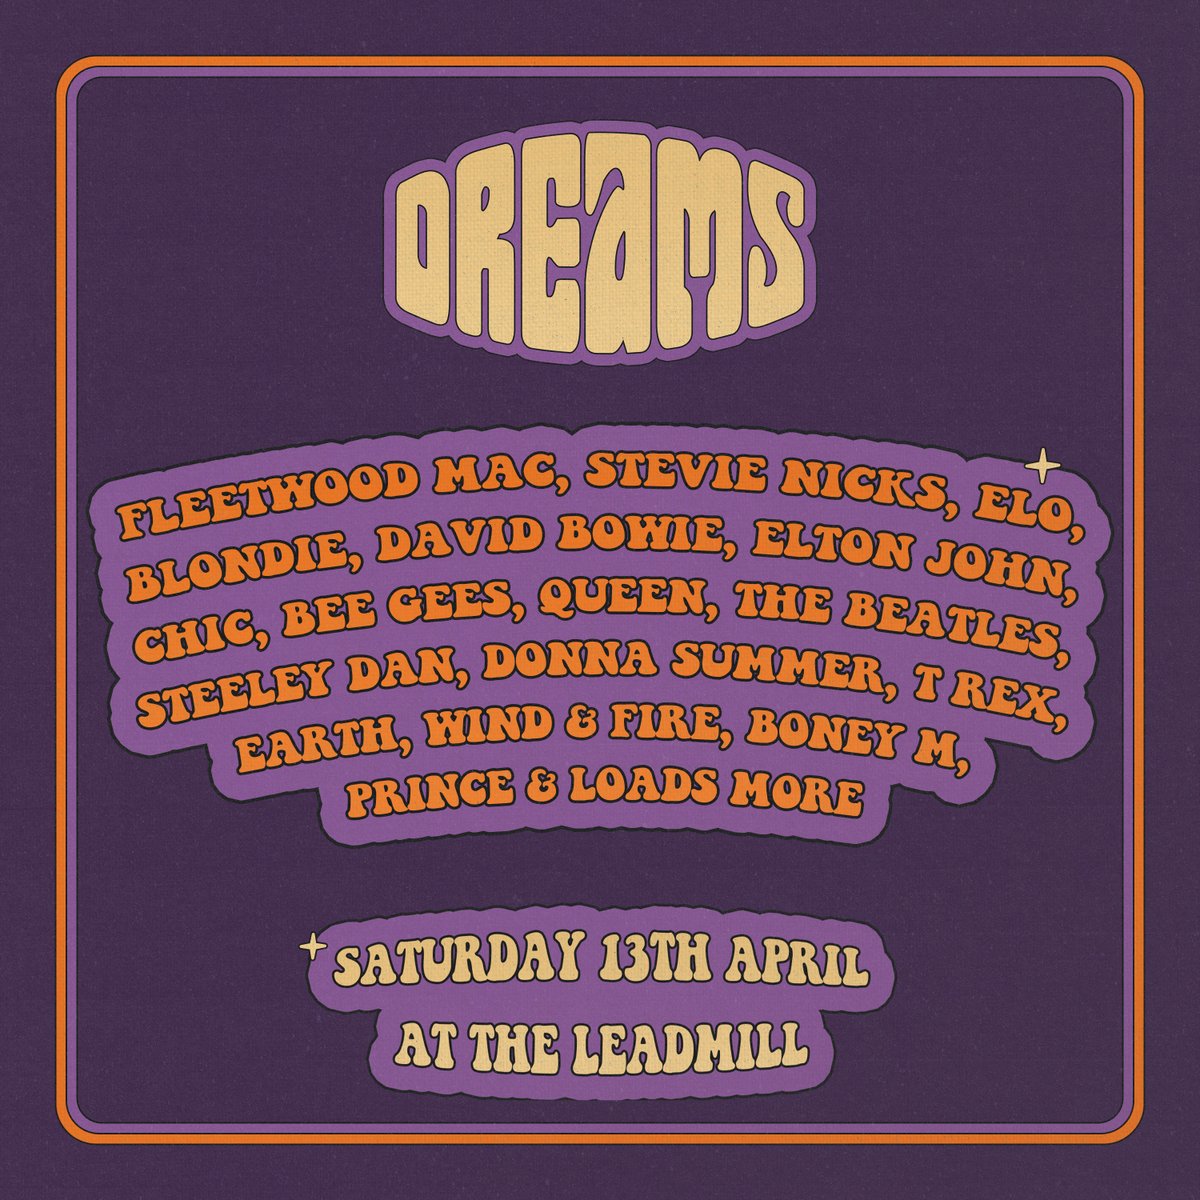 Unleash your inner rock ‘n’ roller this Saturday, with the legendary sounds of Fleetwood Mac and more 70s classics🕺 See you in room 3 at Sonic from 11pm! leadmill.co.uk/event/dreams-a…